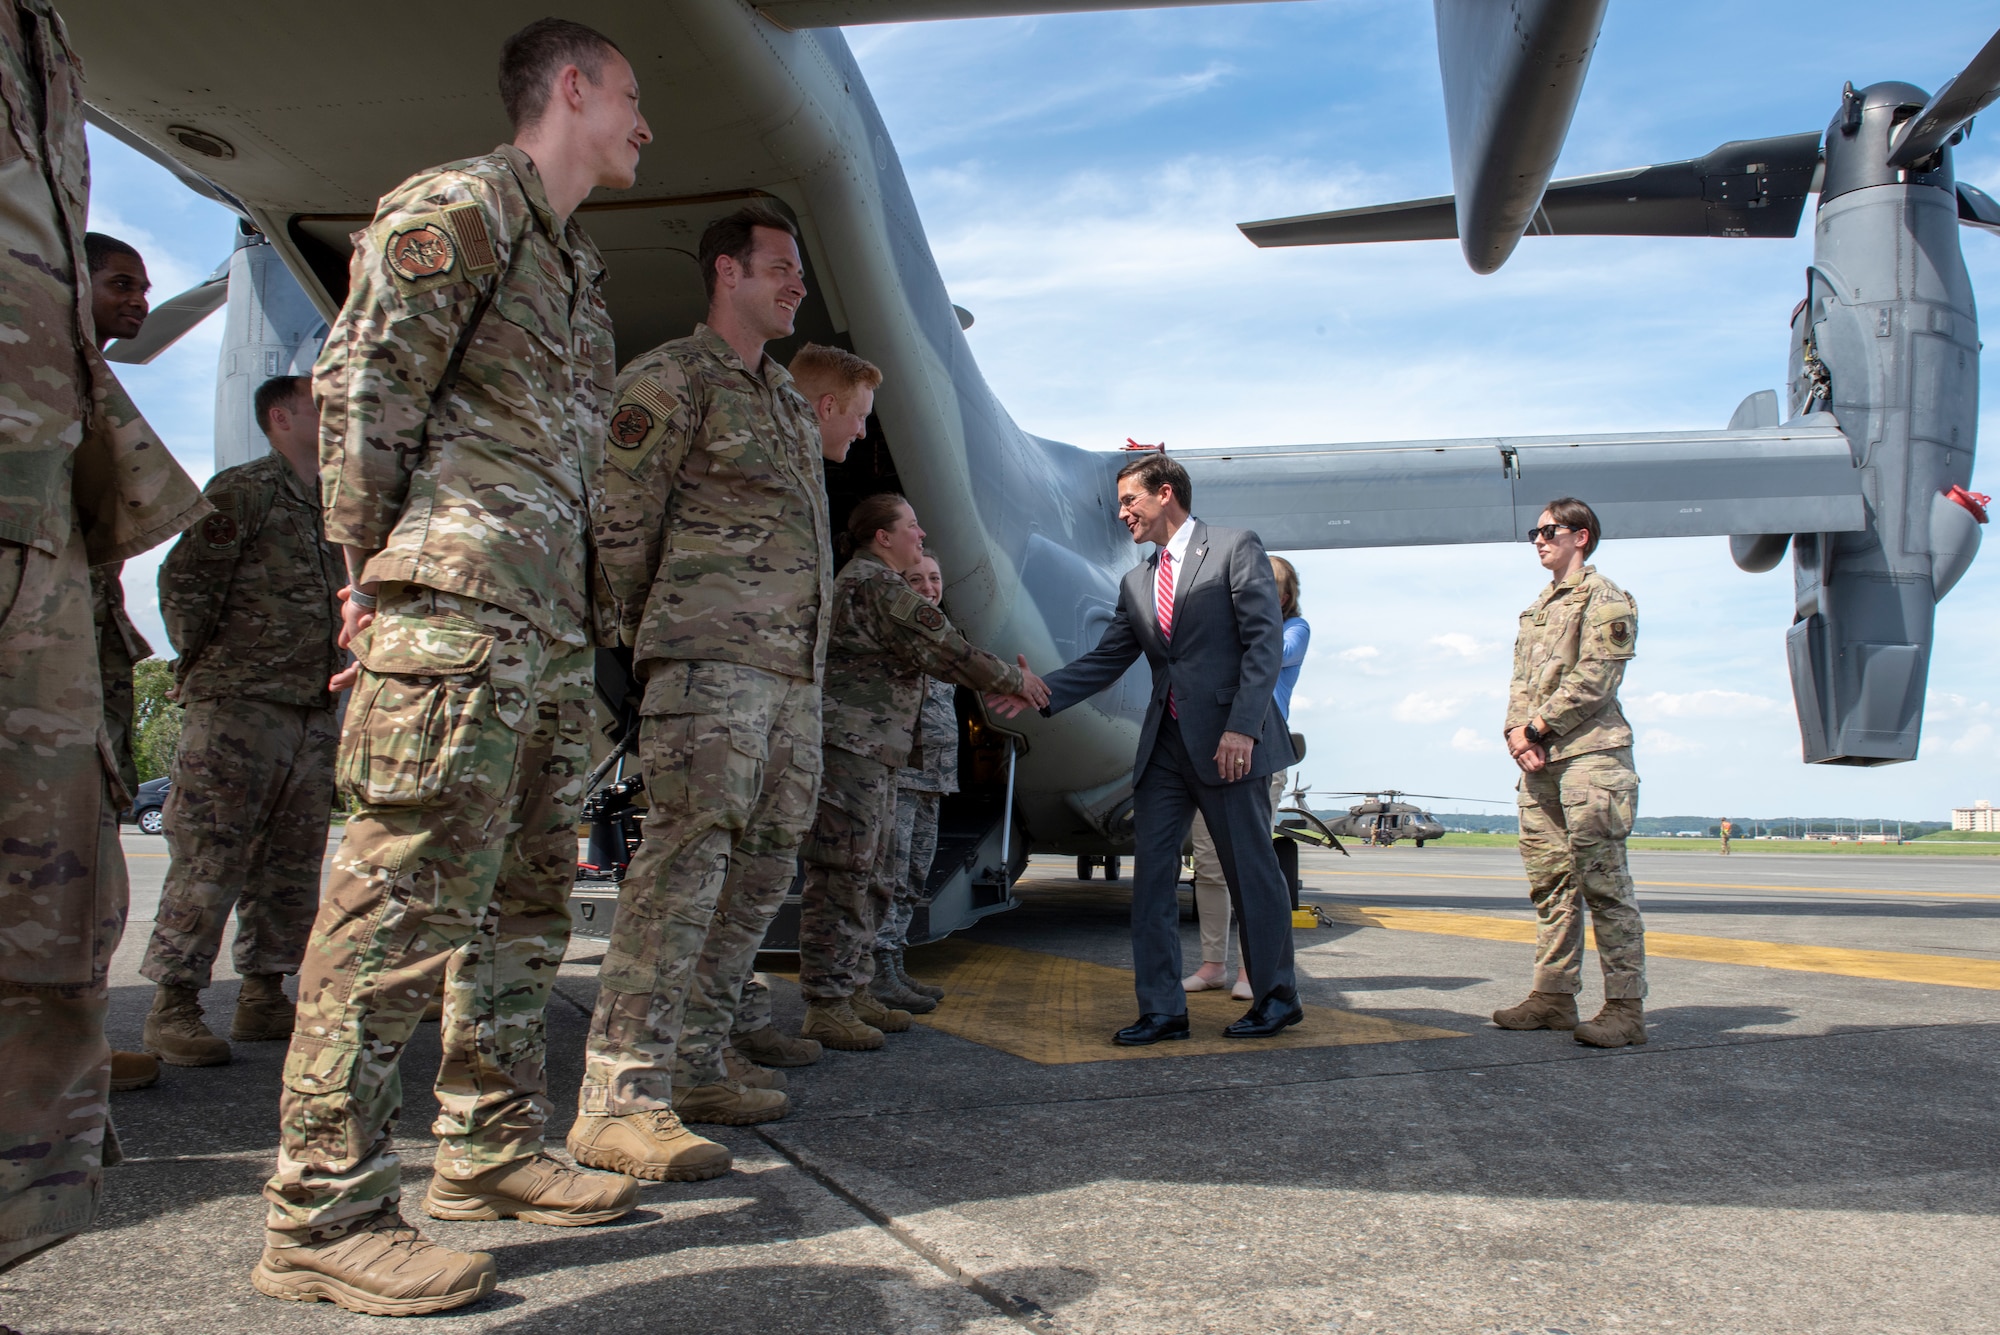 U.S. Secretary of Defense Dr. Mark T. Esper shakes hands with the Airmen of the 353rd Special Operations Group prior to departing Yokota Air Base, Japan to continue his Pacific Tour, Aug. 7, 2019.